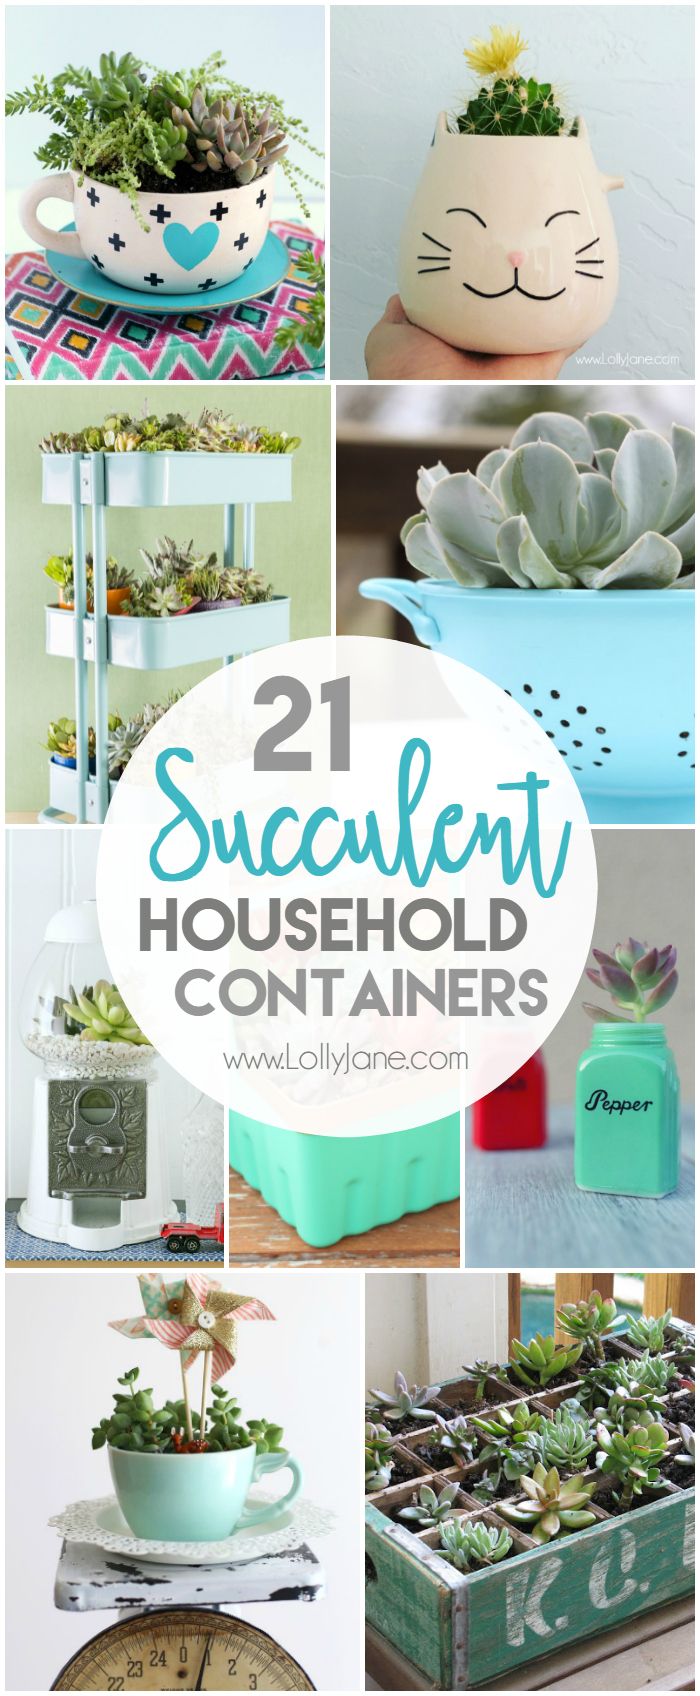 21 household succulent containers. Check out these awesome everyday household it...